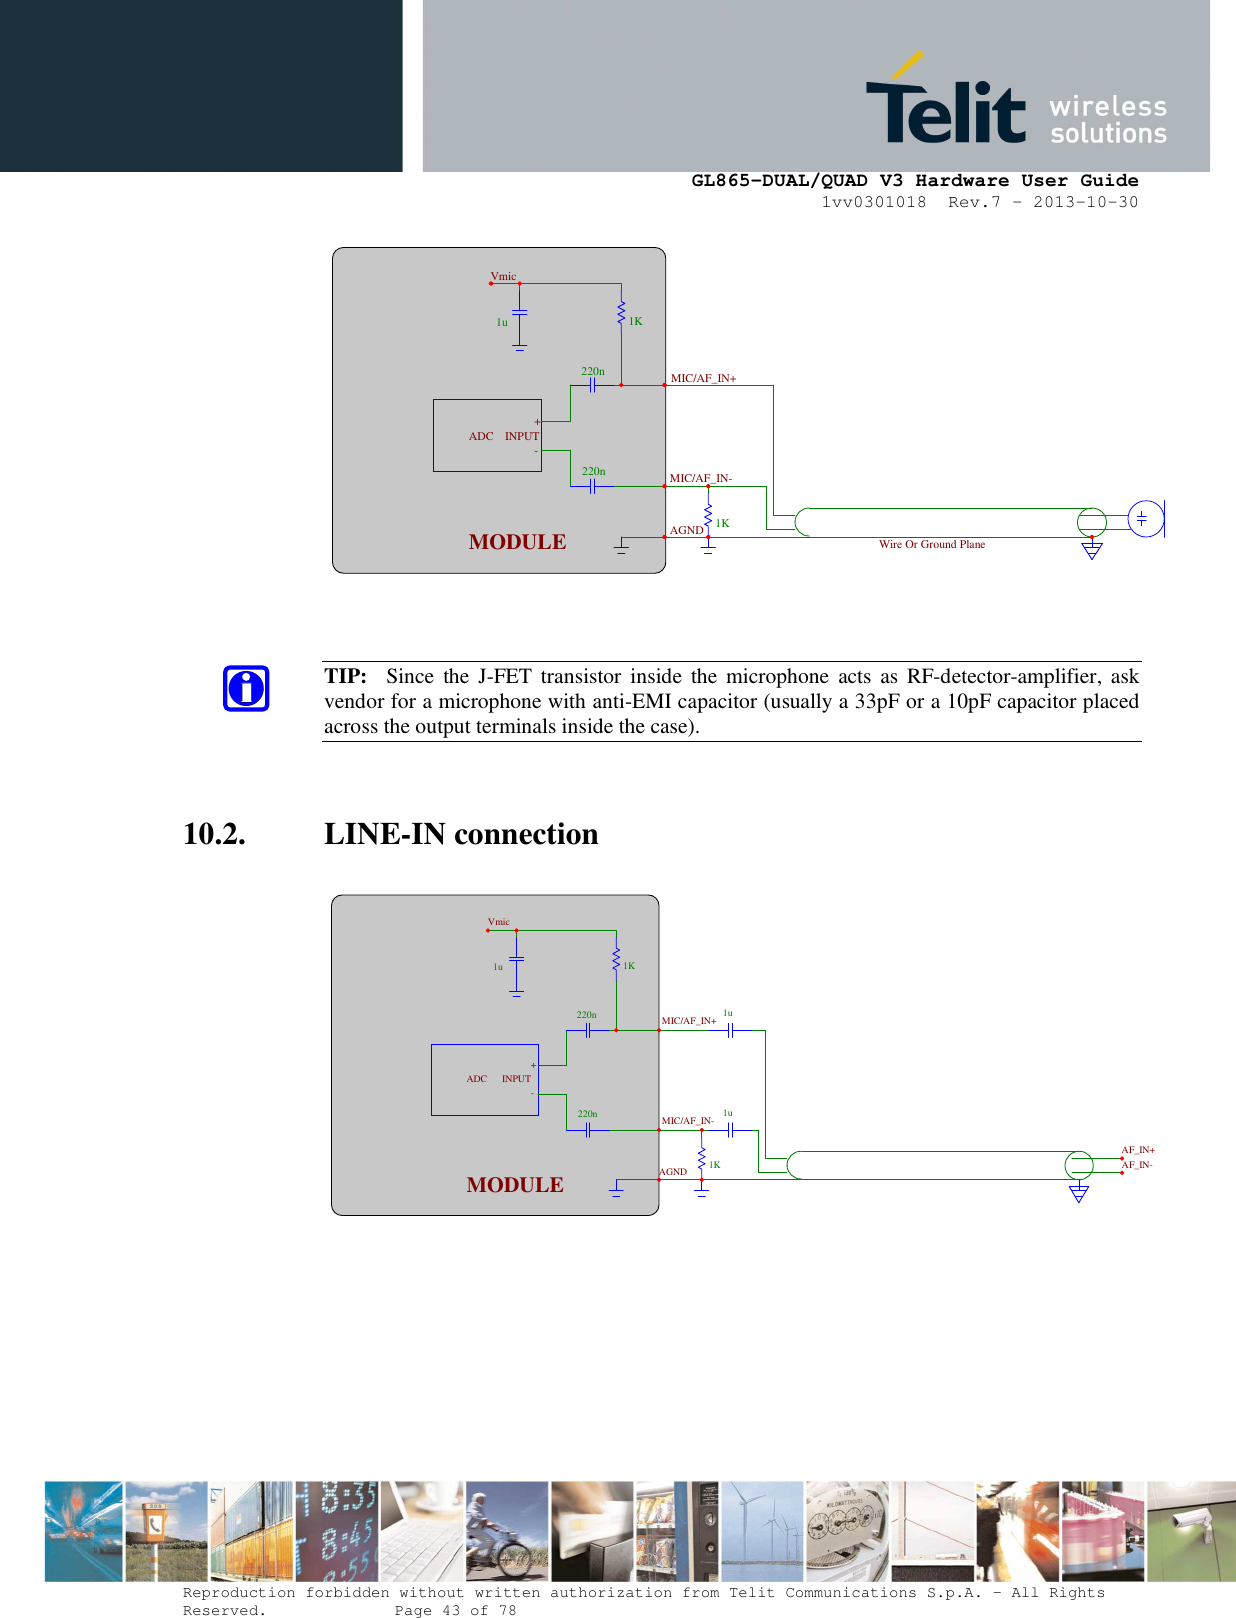      GL865-DUAL/QUAD V3 Hardware User Guide 1vv0301018  Rev.7 – 2013-10-30  Reproduction forbidden without written authorization from Telit Communications S.p.A. - All Rights Reserved.    Page 43 of 78 Mod. 0805 2011-07 Rev.2    TIP:    Since  the  J-FET  transistor  inside  the  microphone  acts  as  RF-detector-amplifier, ask vendor for a microphone with anti-EMI capacitor (usually a 33pF or a 10pF capacitor placed across the output terminals inside the case).   10.2. LINE-IN connection    1u220n220n 1K 1K1u1uAF_IN+MIC/AF_IN+MIC/AF_IN-AGNDMODULE -+INPUTADCVmicAF_IN-1u220n220n 1K1KMIC/AF_IN+MIC/AF_IN-AGND MODULE -+INPUT ADCVmic Wire Or Ground Plane 